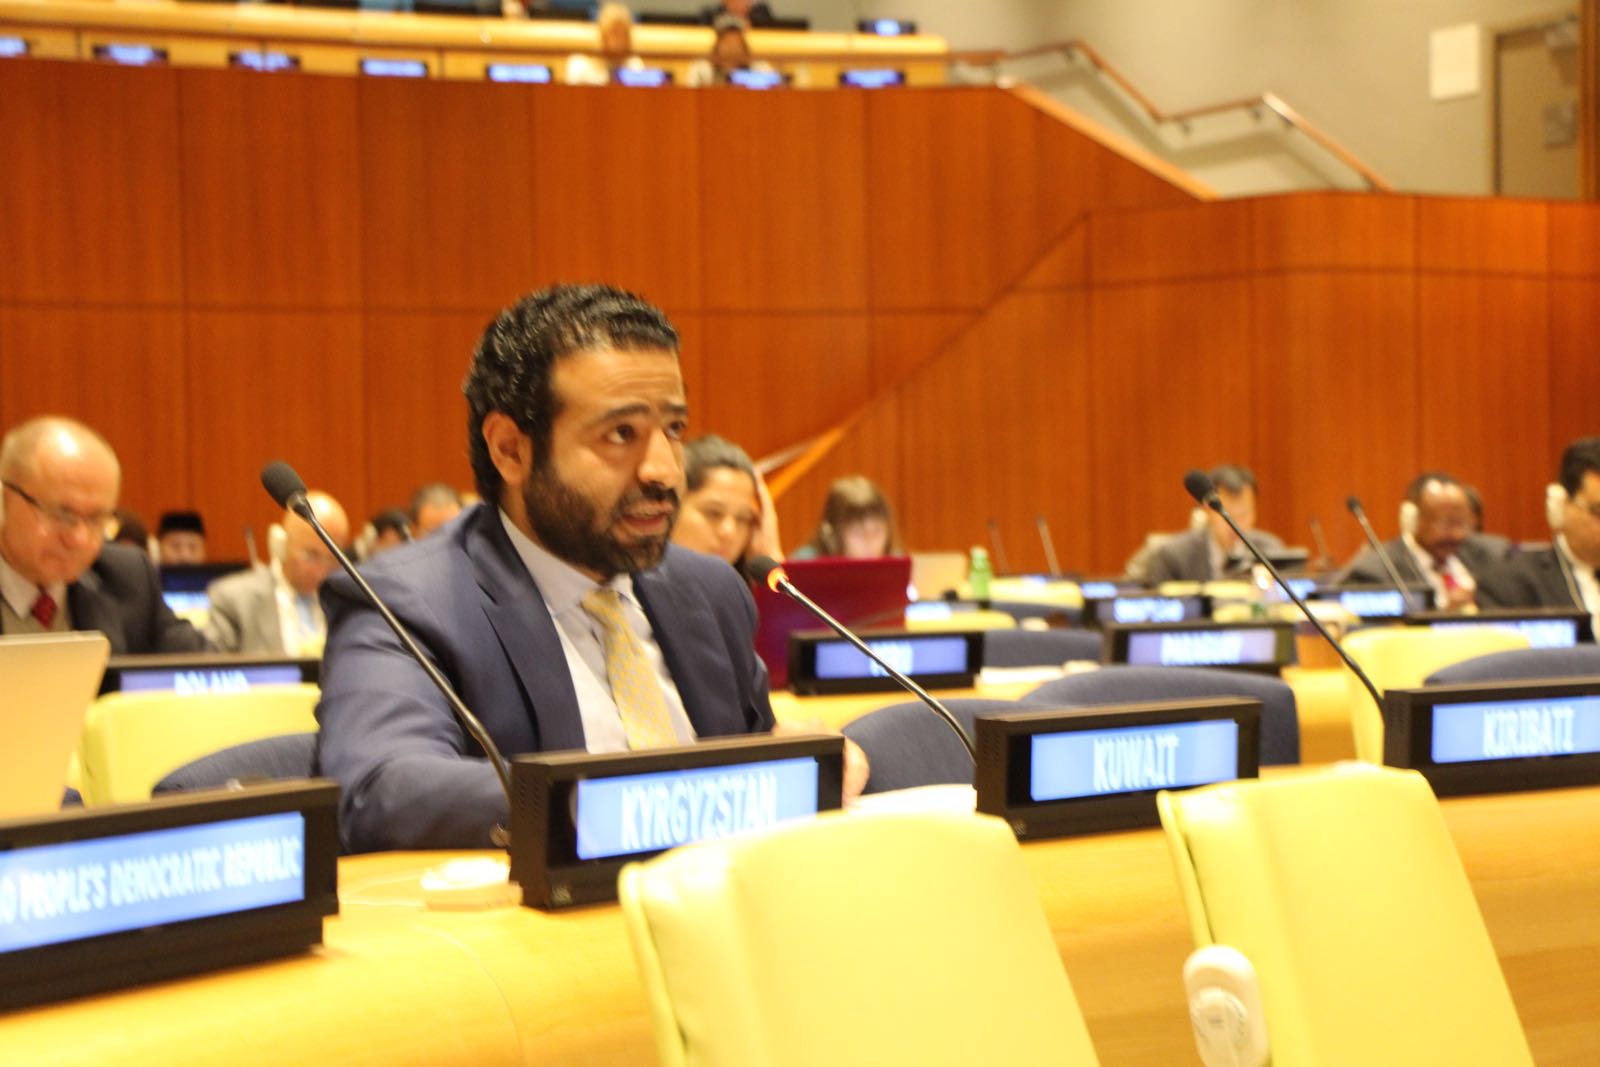 Second secretary Mohammad Al-Ajmi Speaking at the sixth meeting for the legal committee of the 72nd UN General Assembly